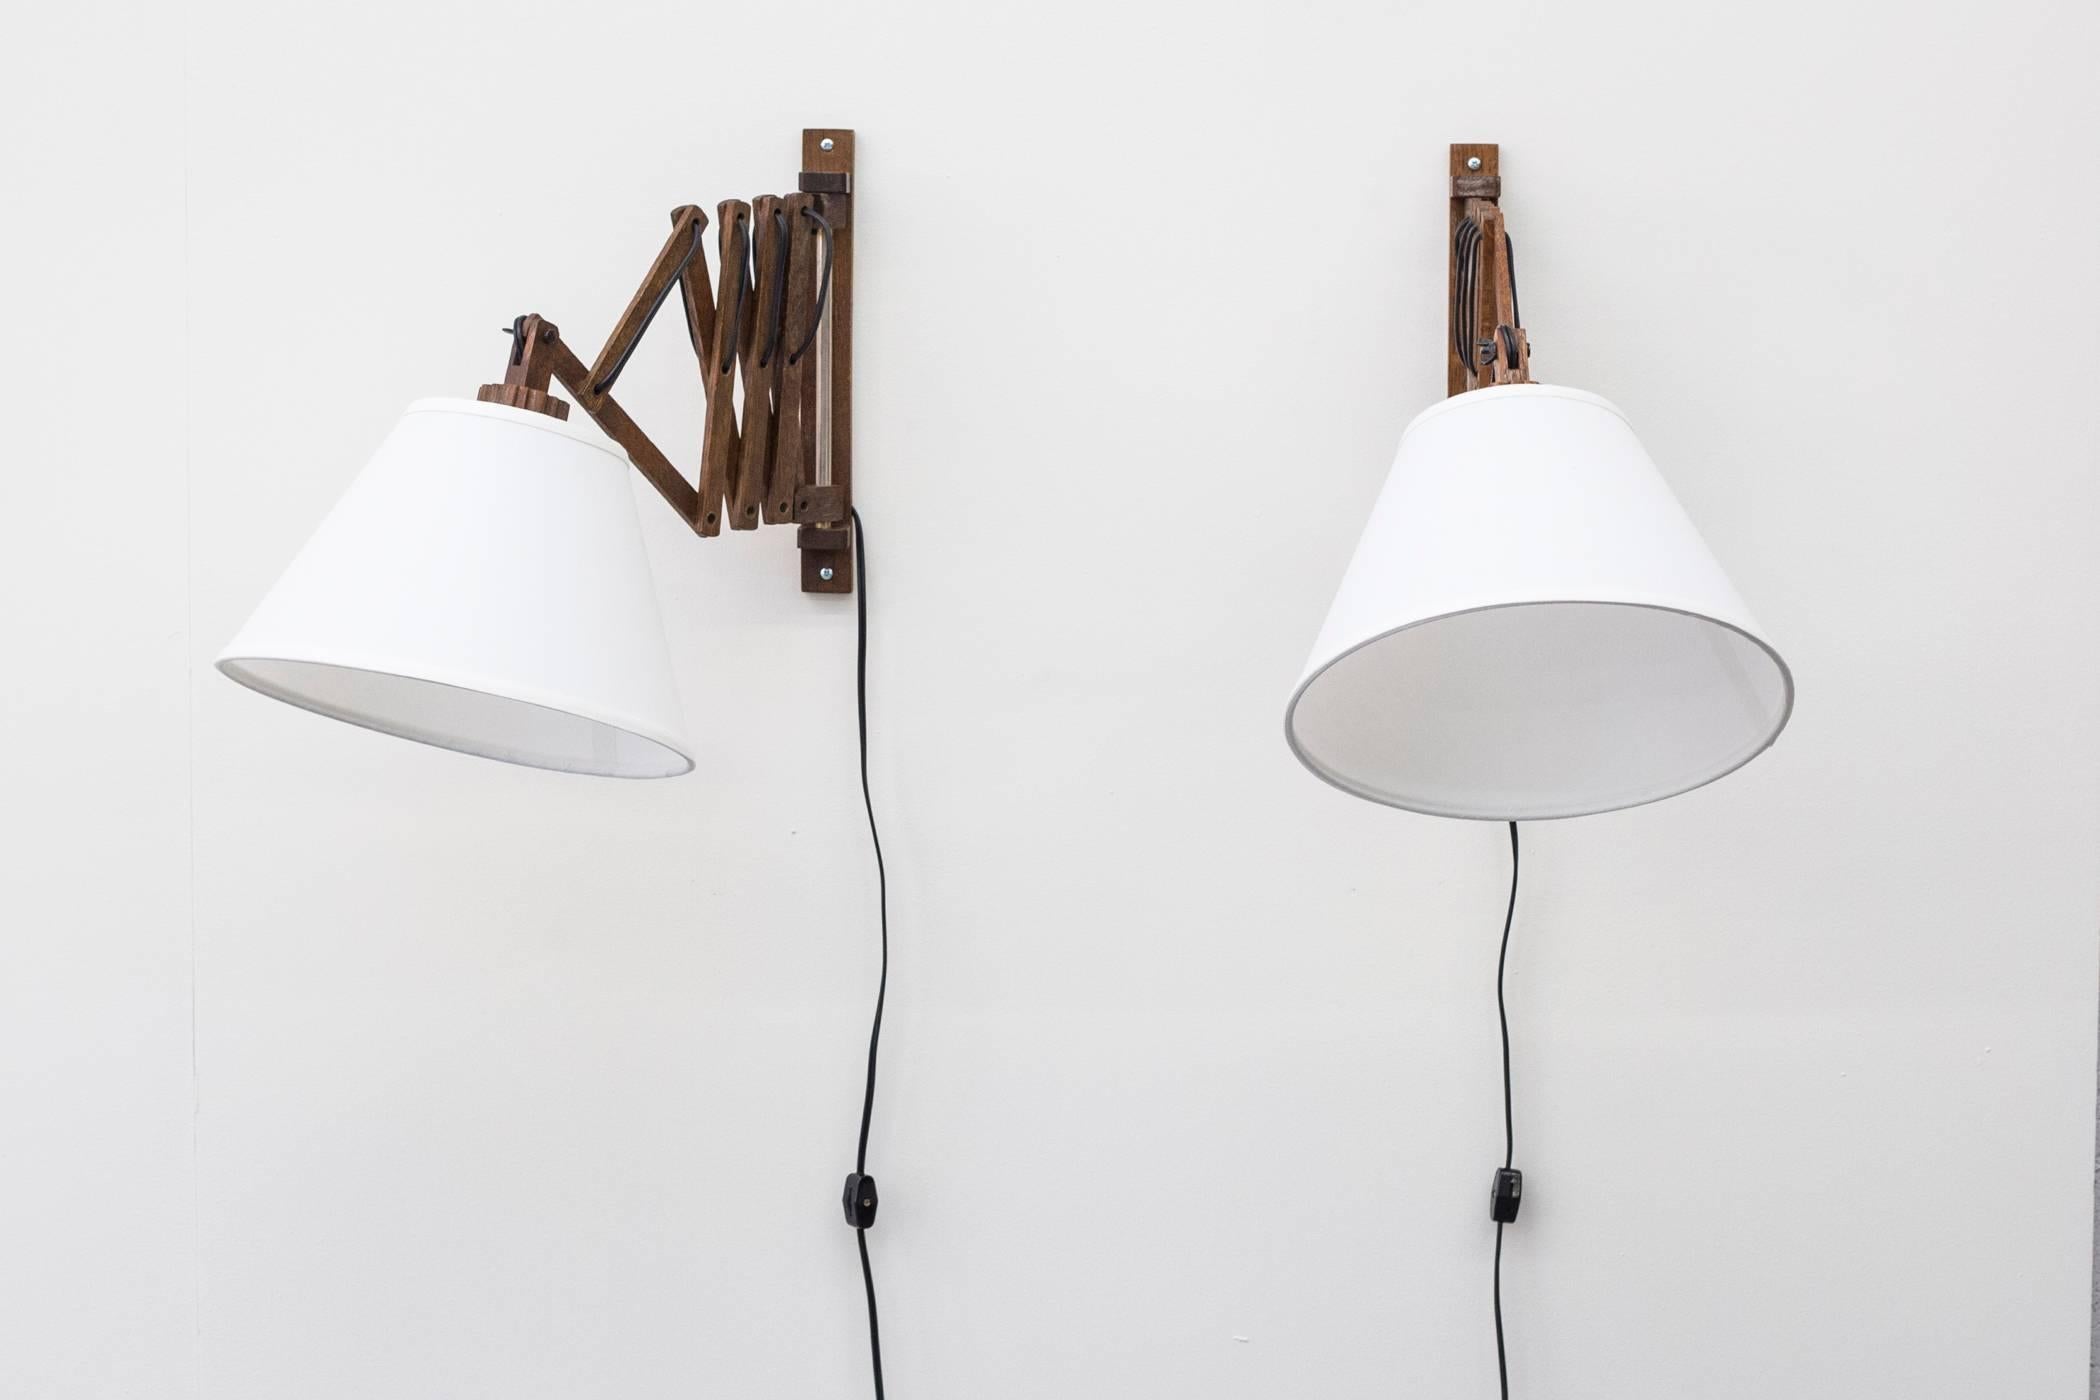 Pair of Mid-Century Modern wood wall-mounted accordion lamps with new conical linen shades. In good original condition with visible signs of age. Set price.